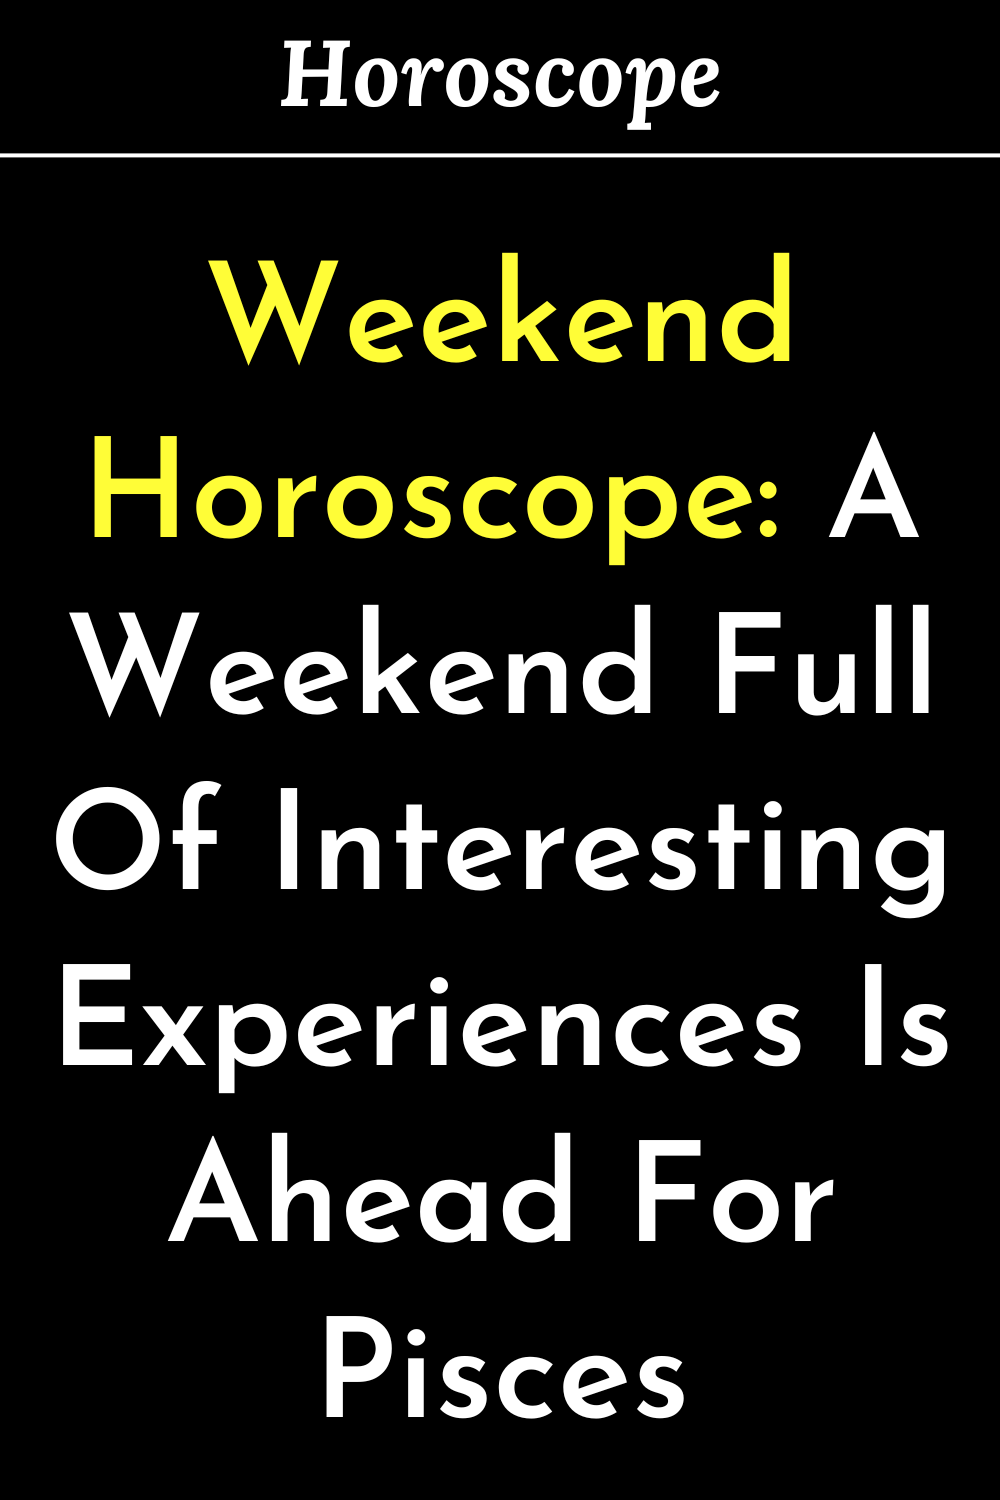 Weekend Horoscope: A Weekend Full Of Interesting Experiences Is Ahead For Pisces